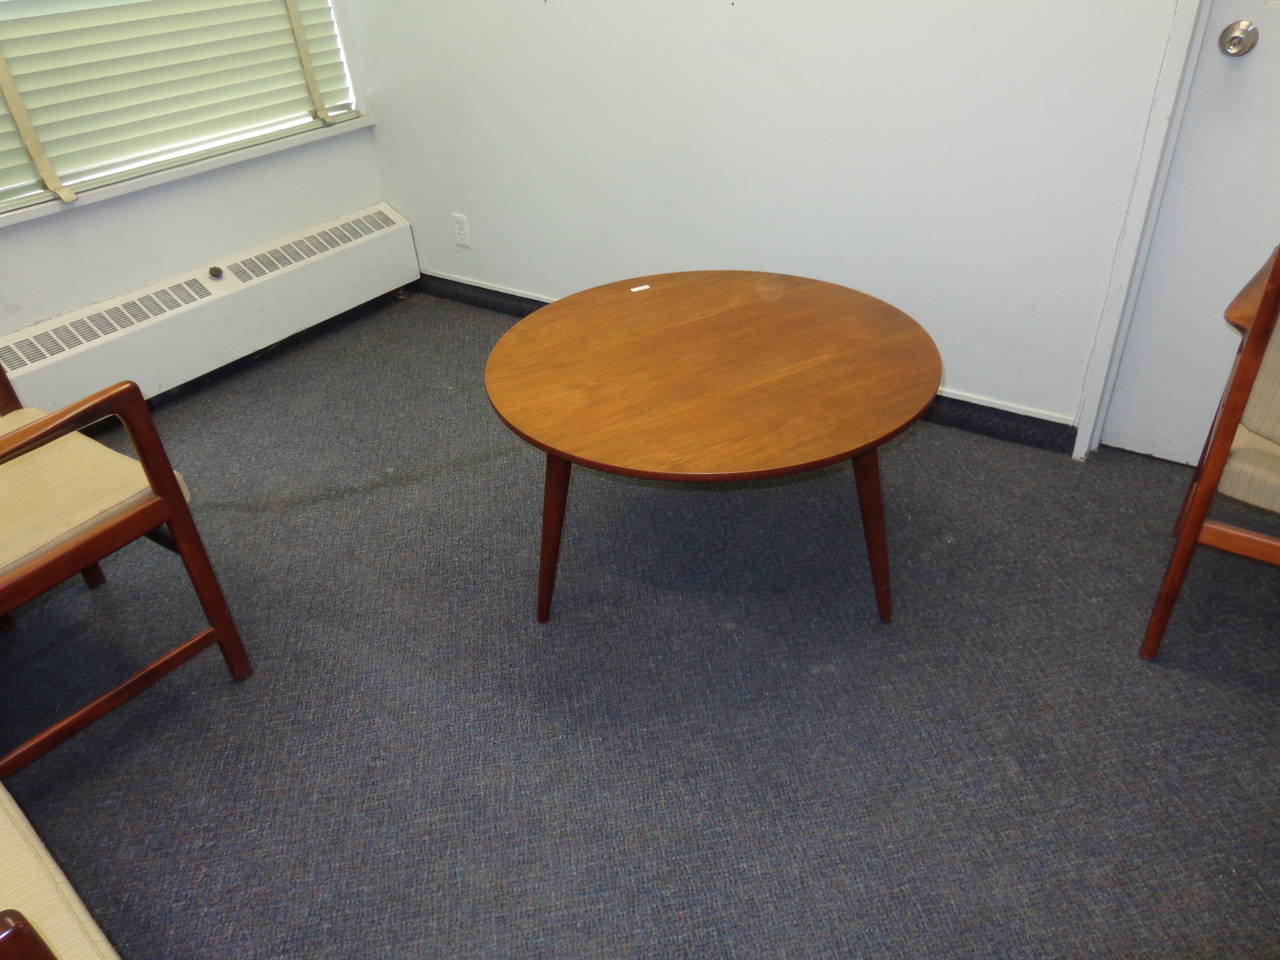 Hans Wegner circular teak coffee table with three tapered legs. Manufactured by Andreas Tuck.